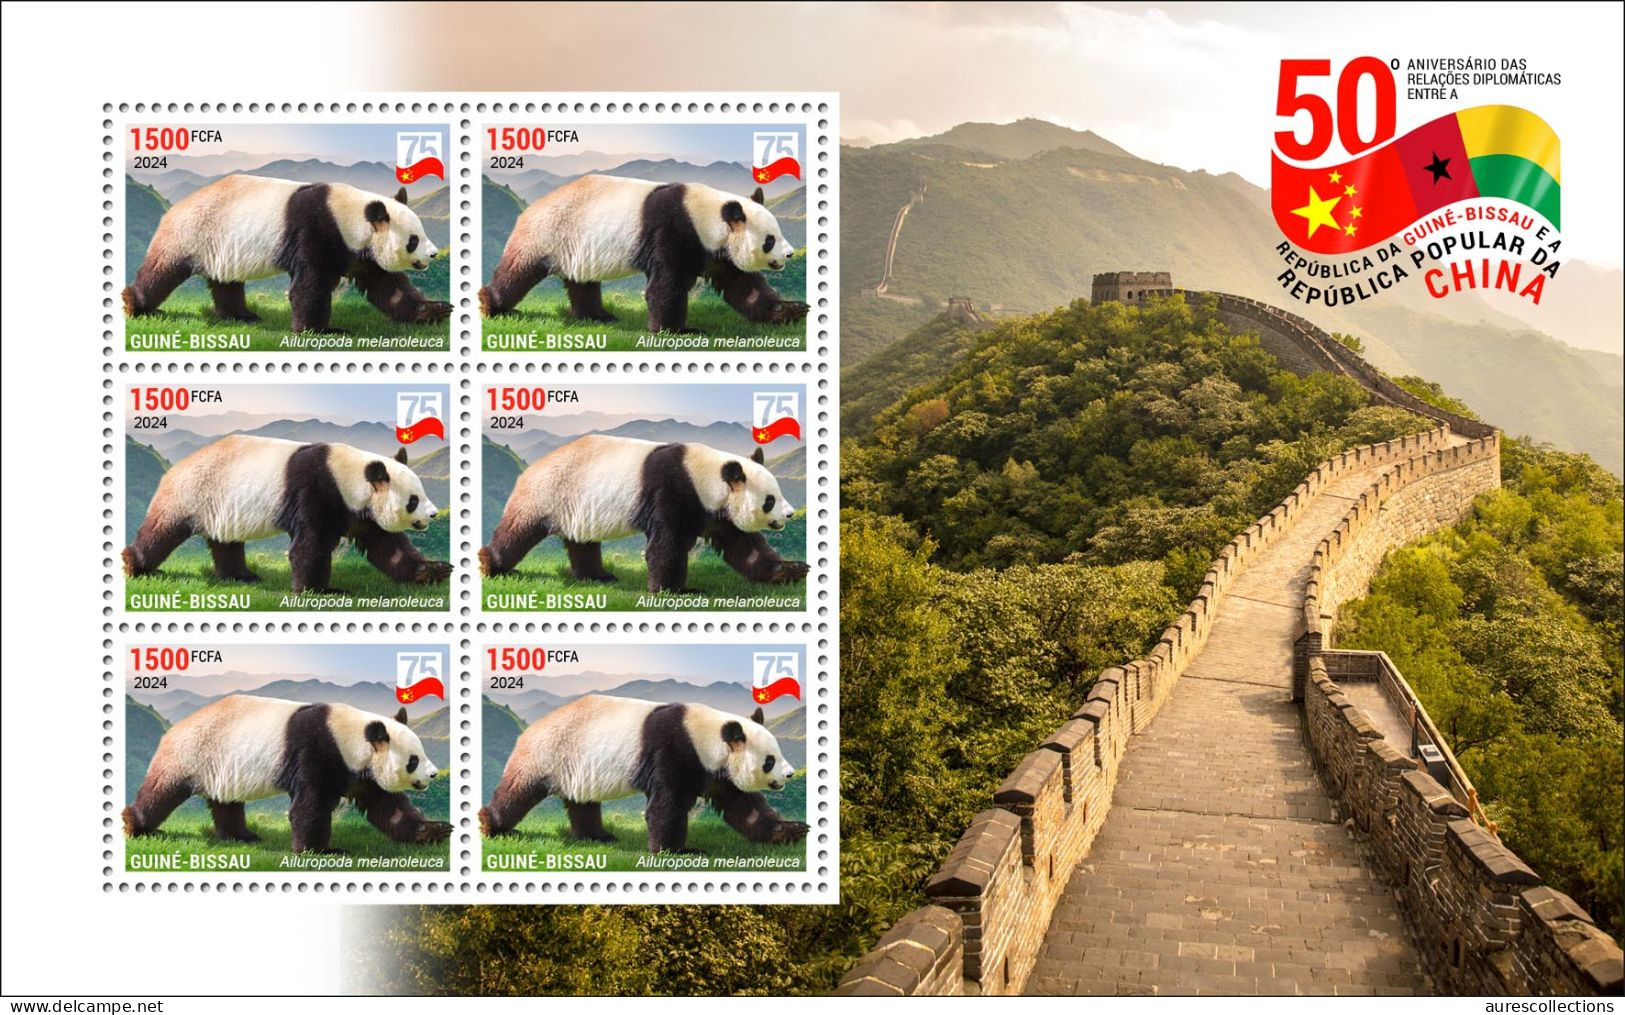 GUINEA BISSAU 2024 MS 6V - CHINA DIPLOMATIC RELATIONS - GIANT PANDAS PANDA GEANT - CHINA ANNIVERSARY - GREAT WALL - MNH - Ours